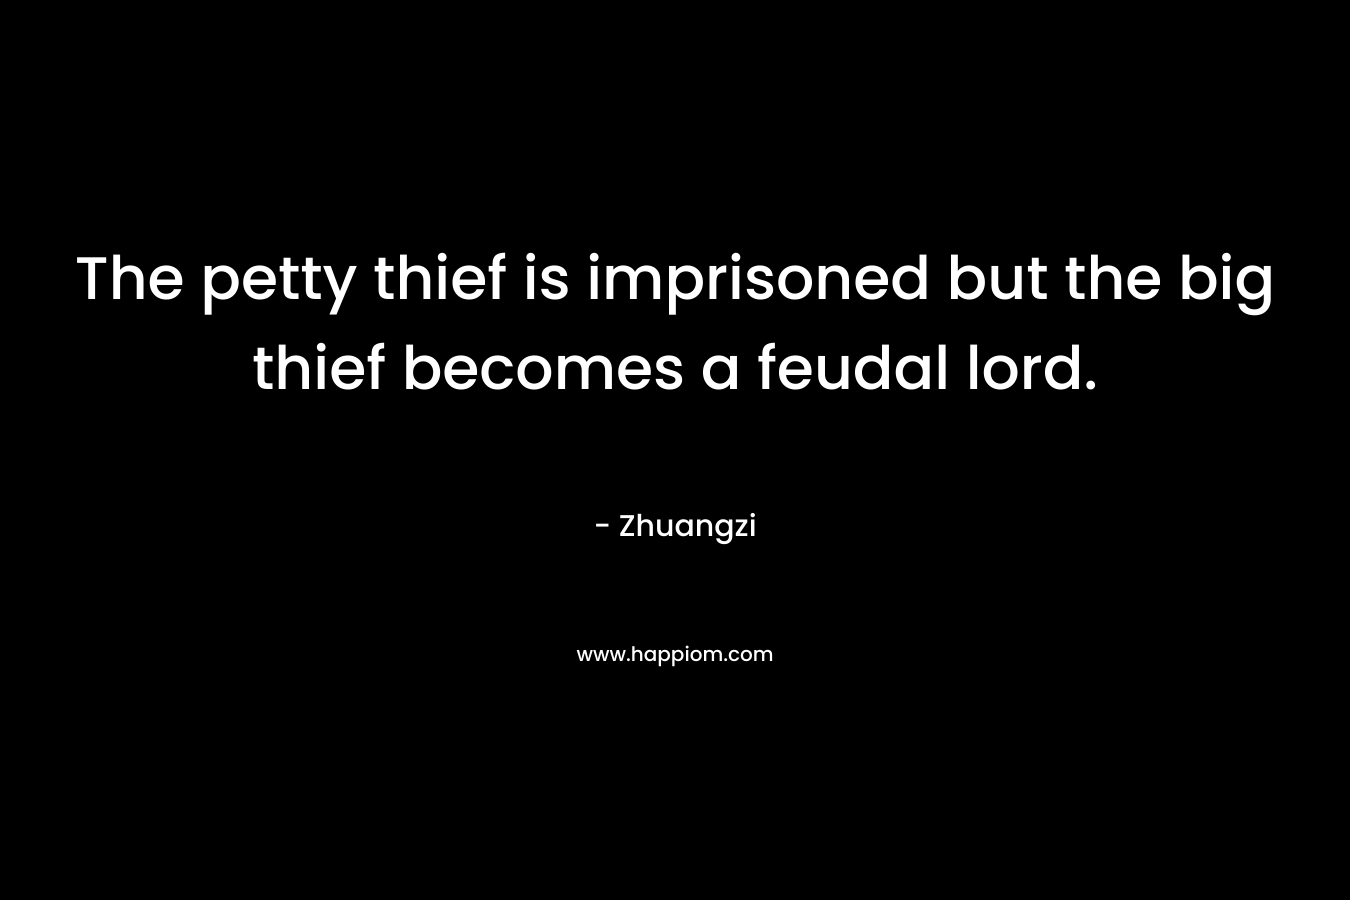 The petty thief is imprisoned but the big thief becomes a feudal lord. – Zhuangzi